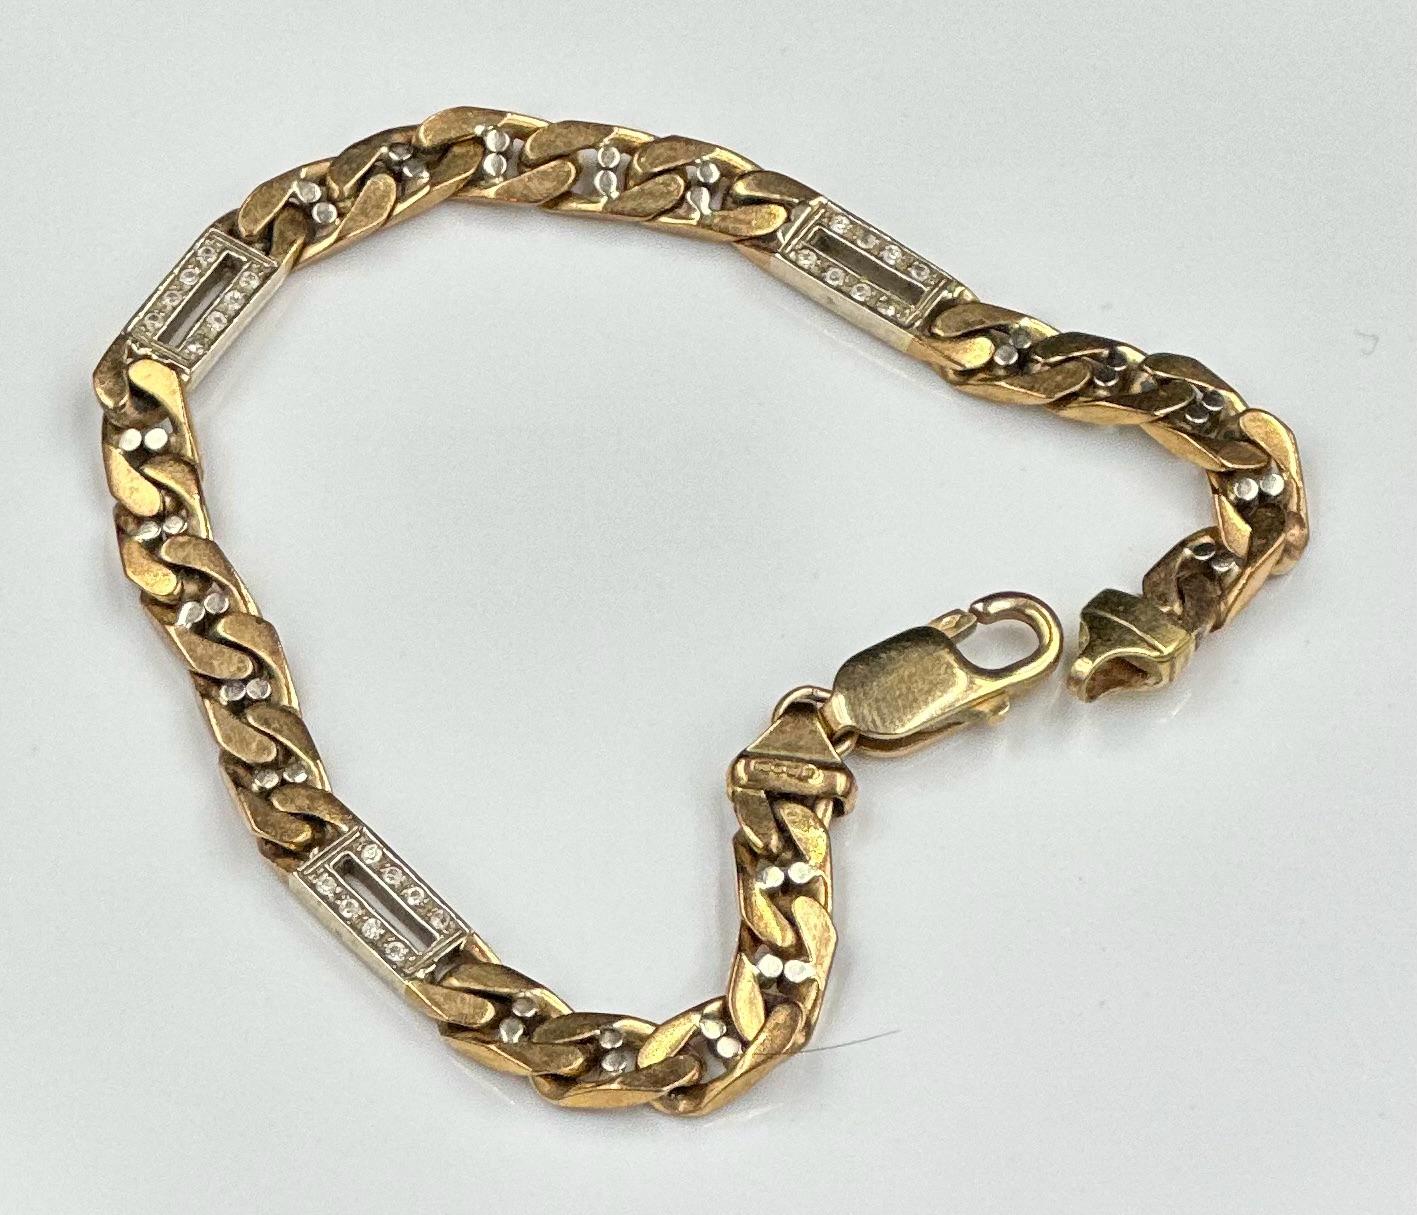 A 9ct gold bracelet with space white gold and diamond spacers, approximate total weight 18.8g